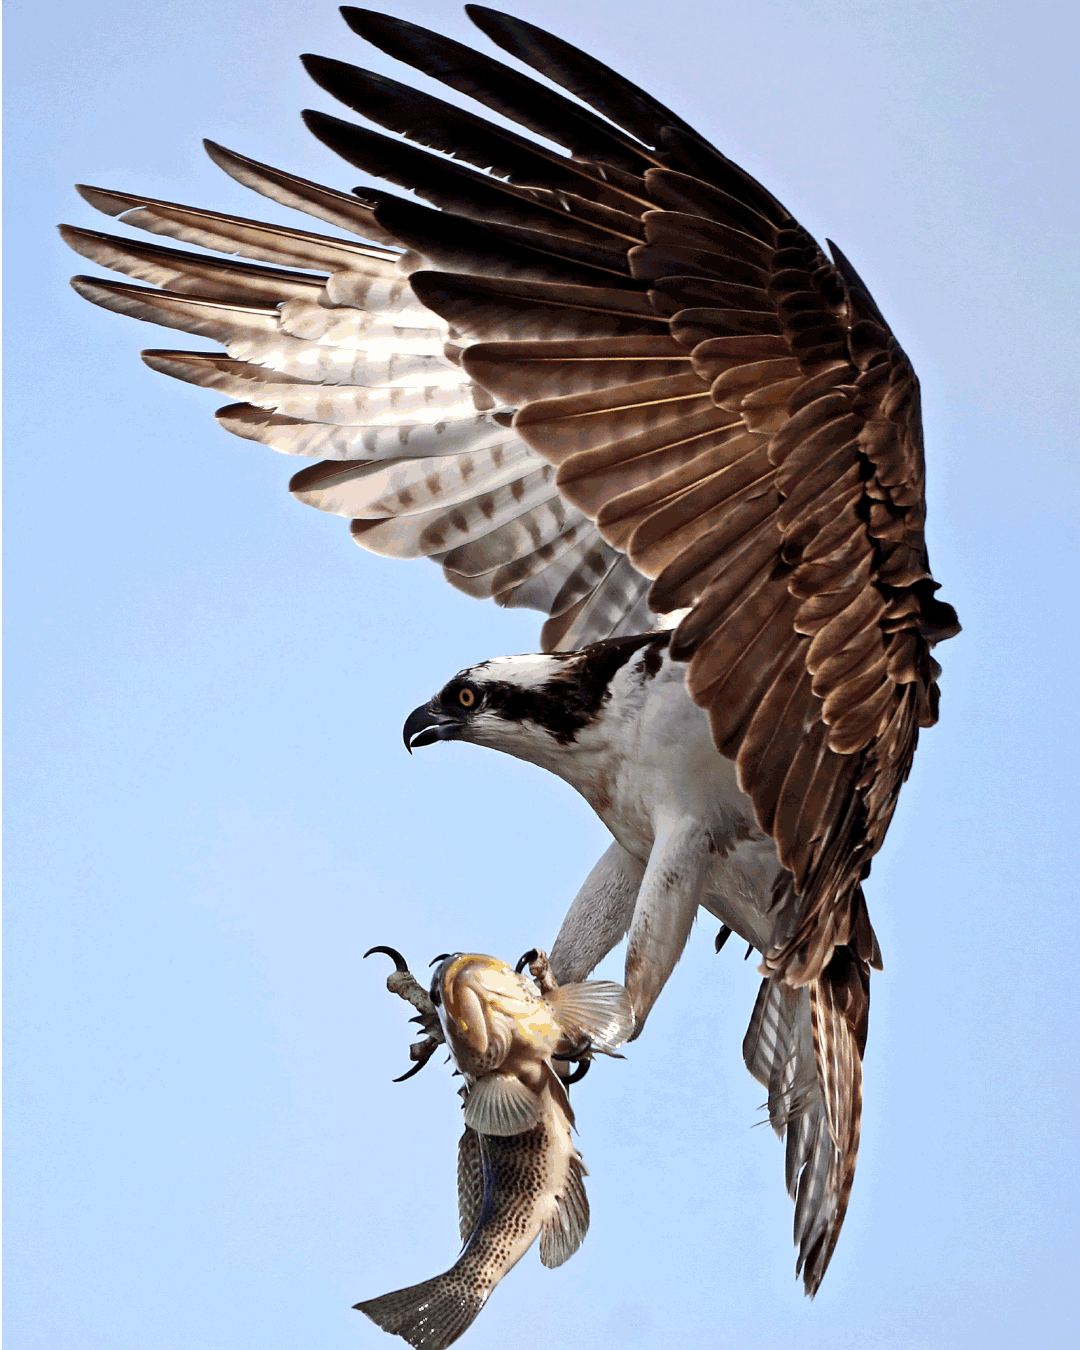 A gif of an osprey clutching a large spotted bay bass.